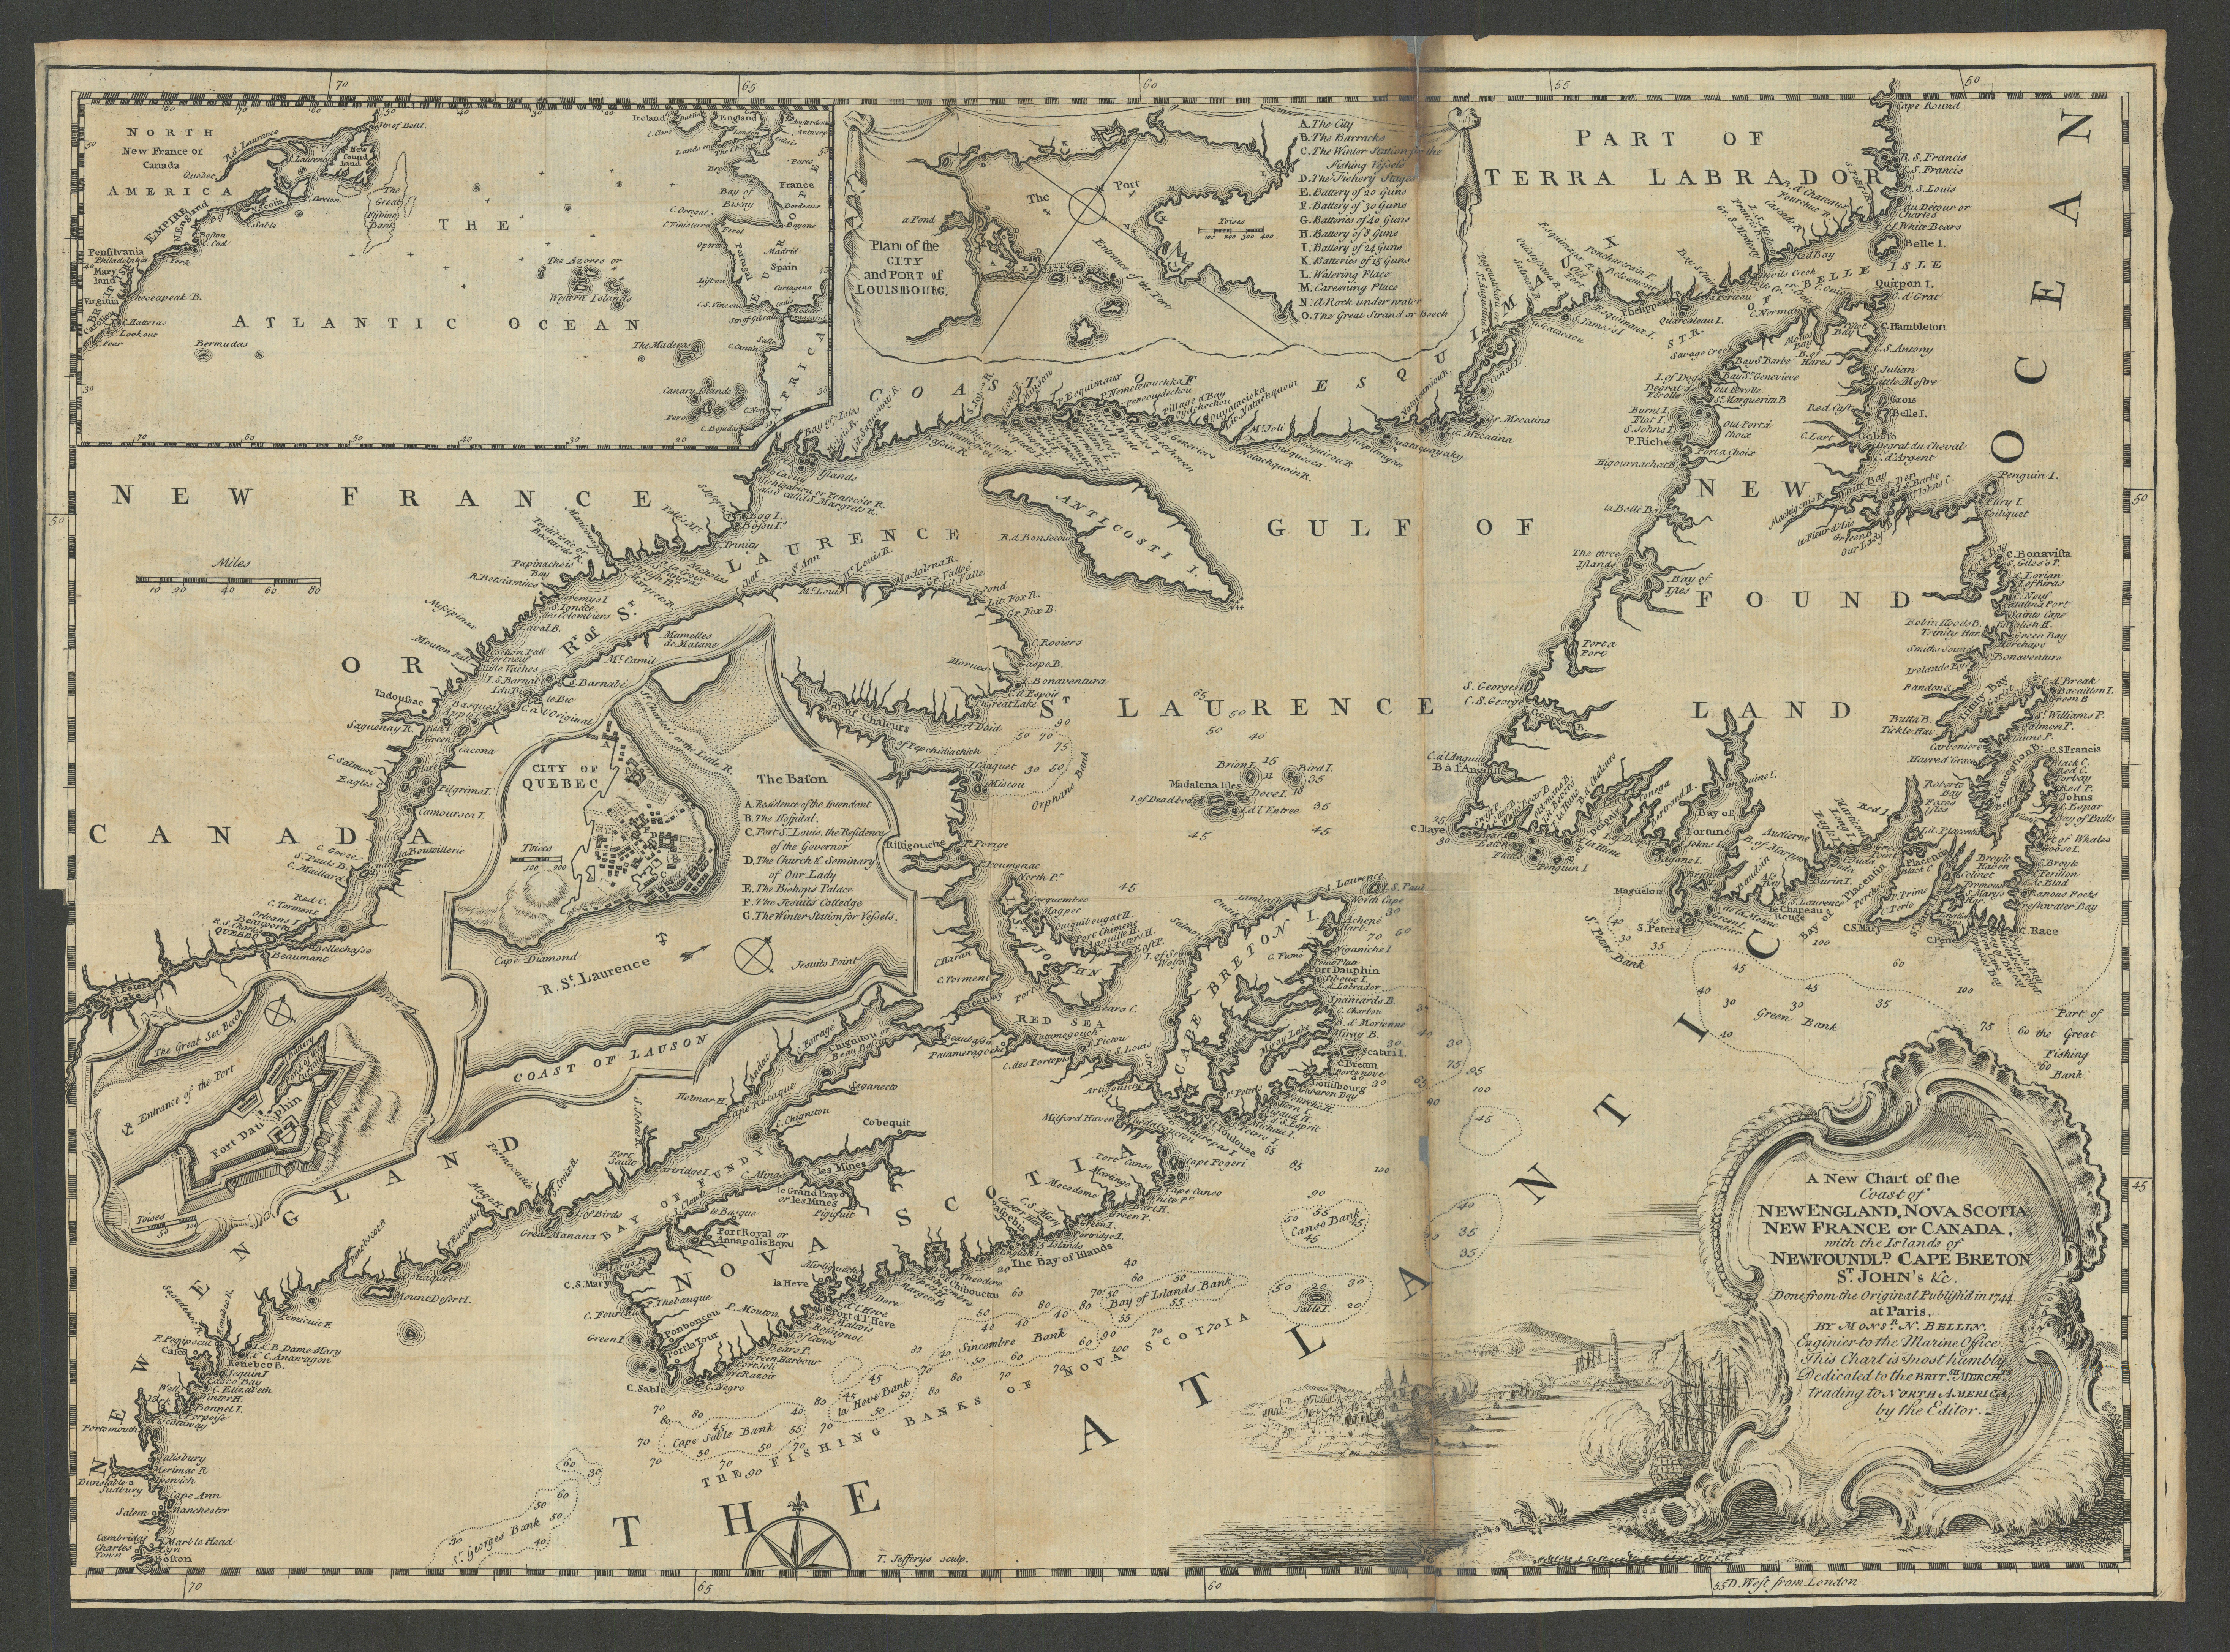 Associate Product The Coast of New England, Nova Scotia, New France or Canada. GENTS MAG 1746 map